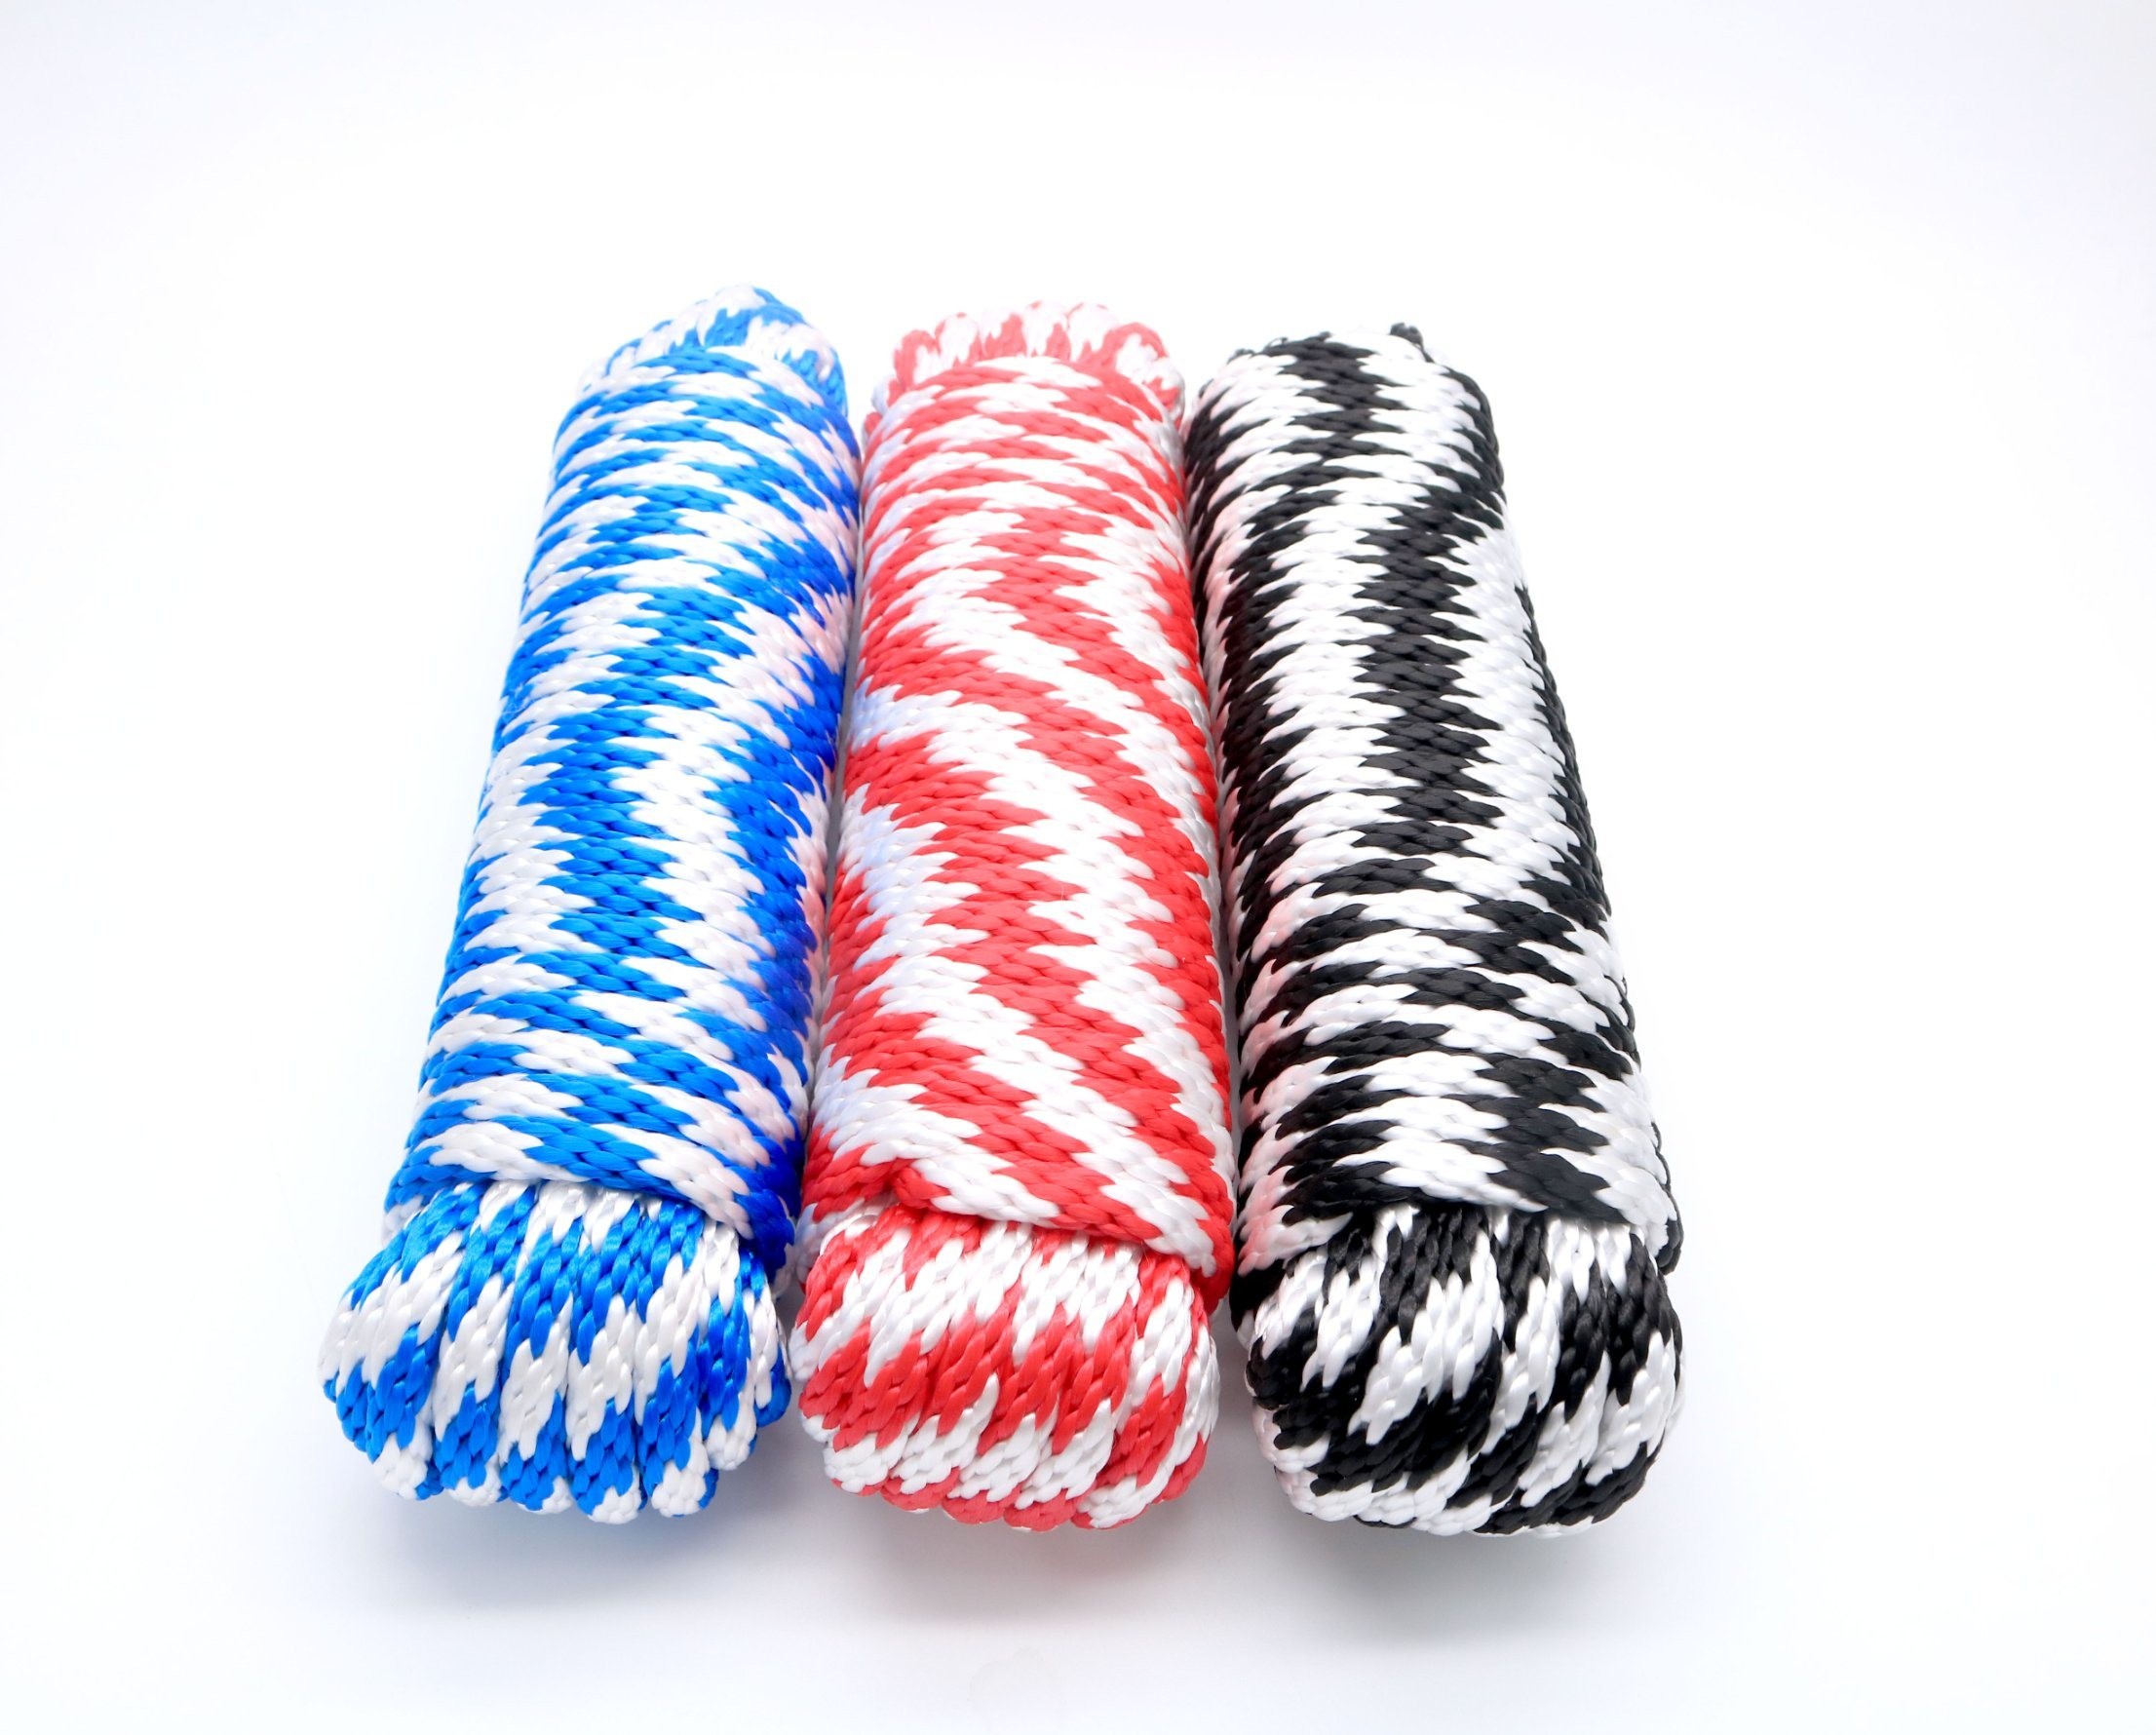 Igh Quality Customized PP Multi Rope/Solid Braid Rope for Outdoor Gear, Packaging, Agriculture, Shipping